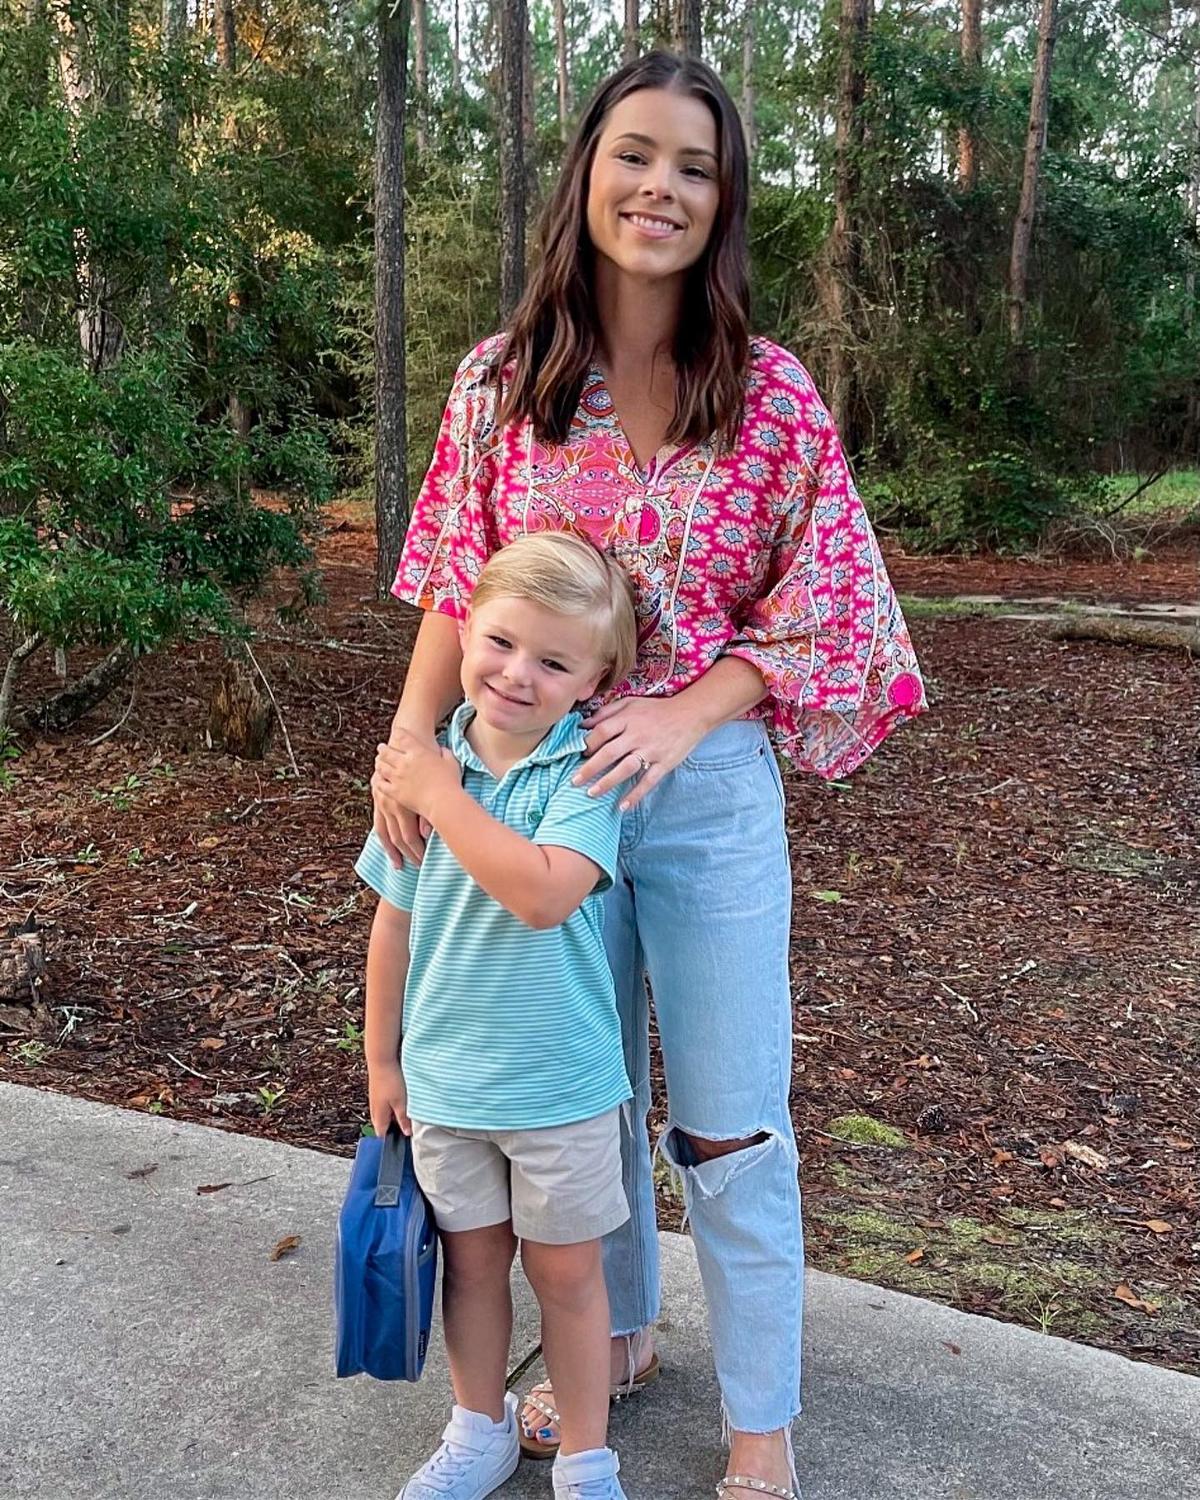 Brodie Kenyon with his mother Jessica. (Courtesy of <a href="https://www.instagram.com/jess_kenyon_/">Jessica Kenyon</a>)